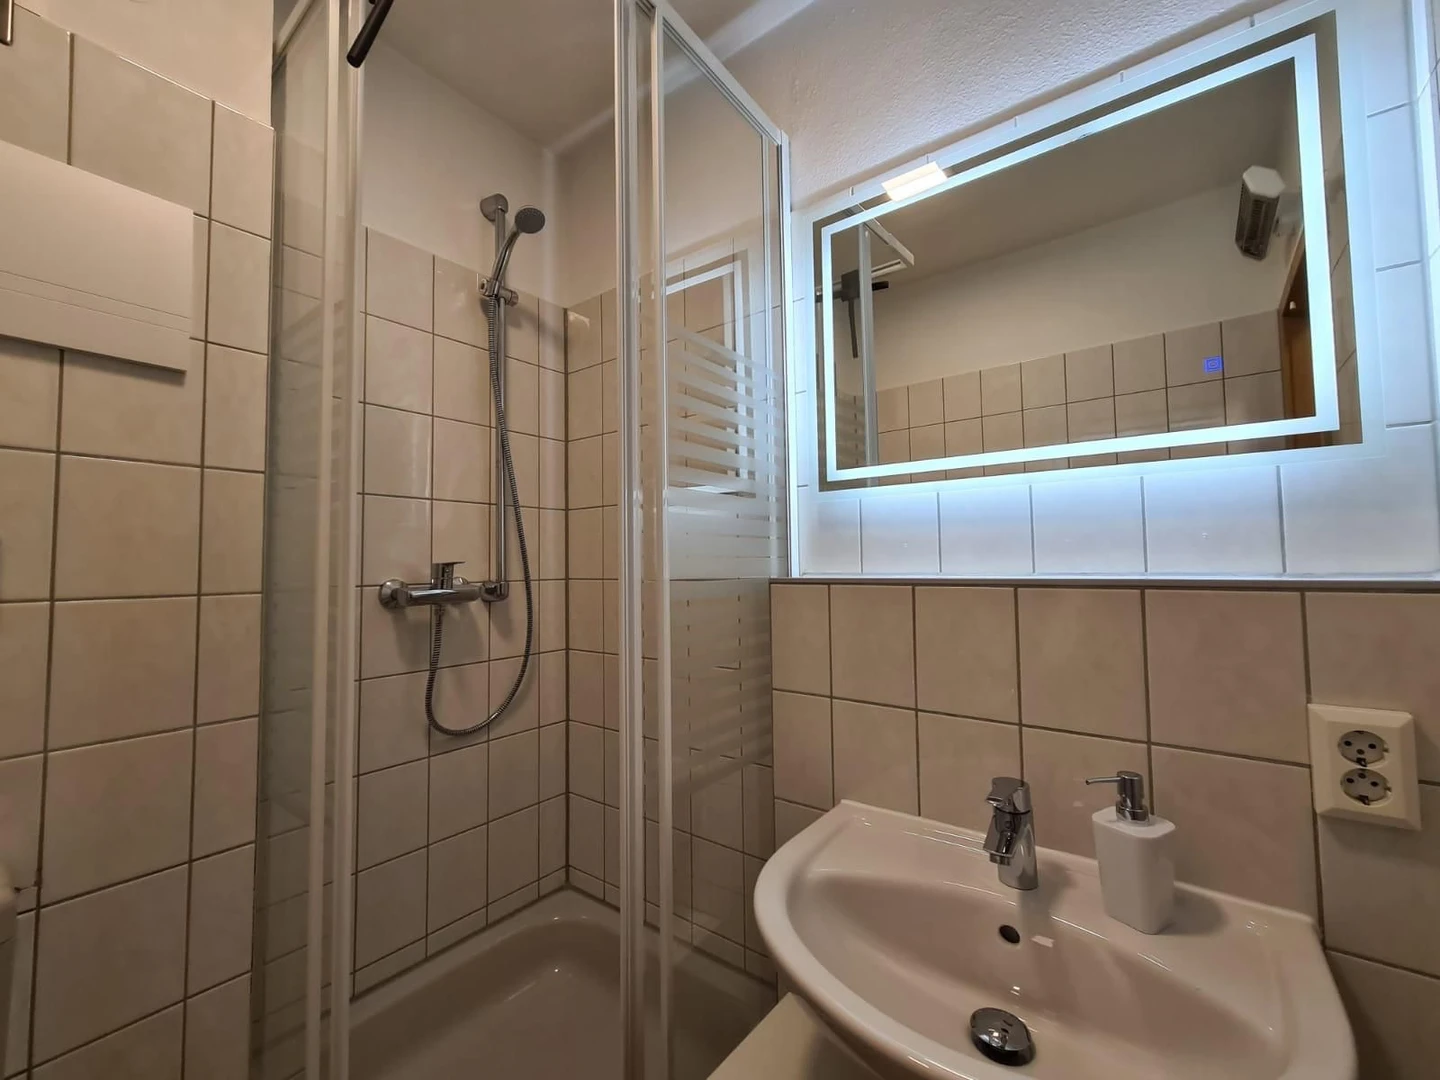 Room for rent with double bed Dresden